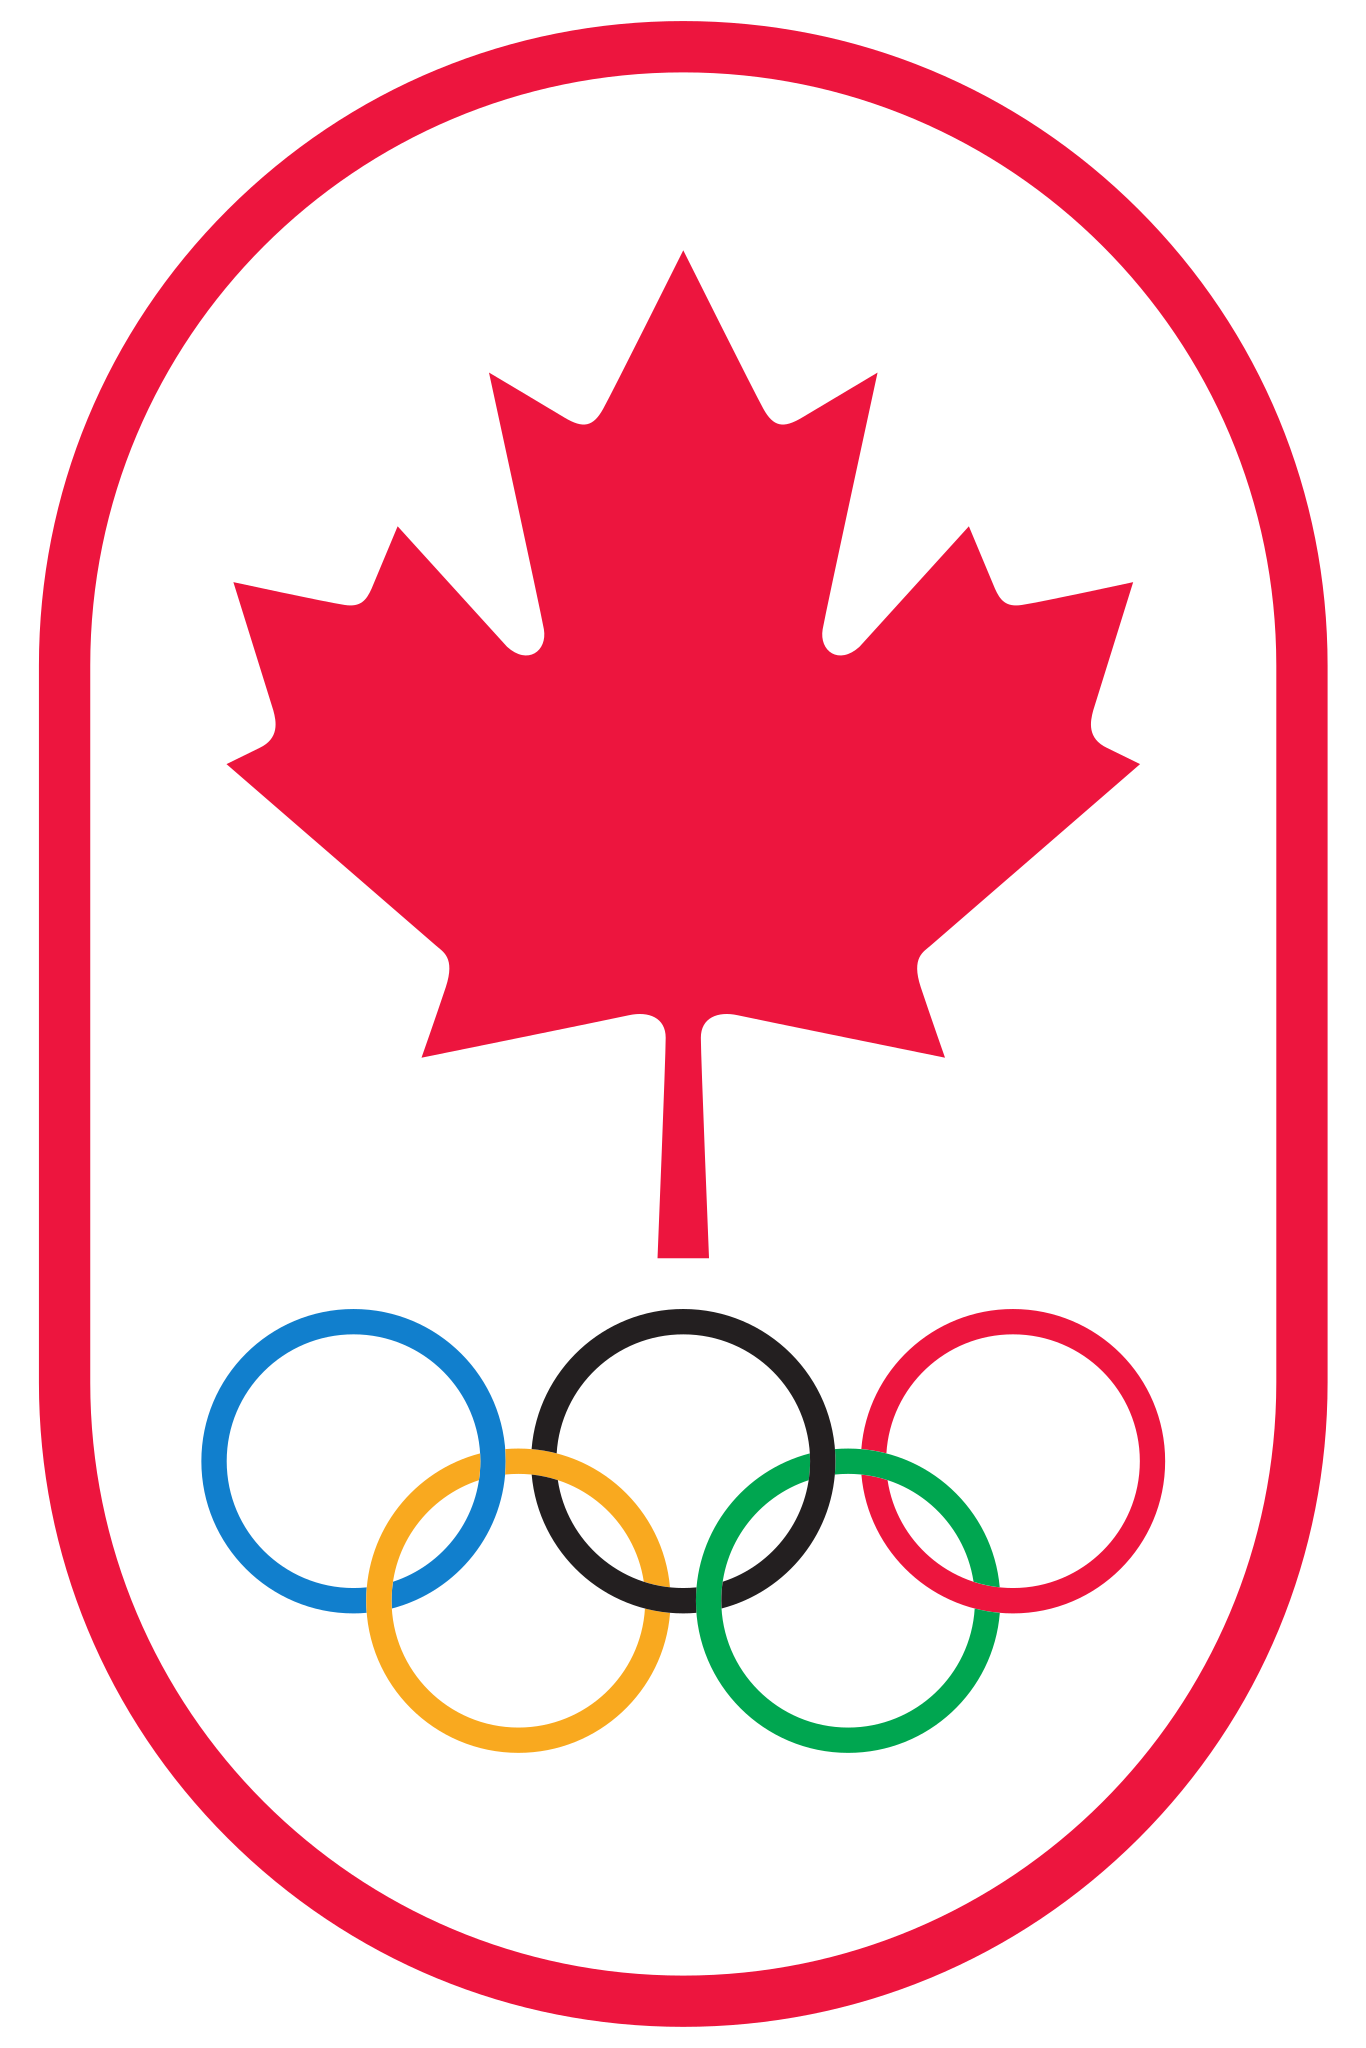 Canadian_Olympic_Committee_logo.svg.png